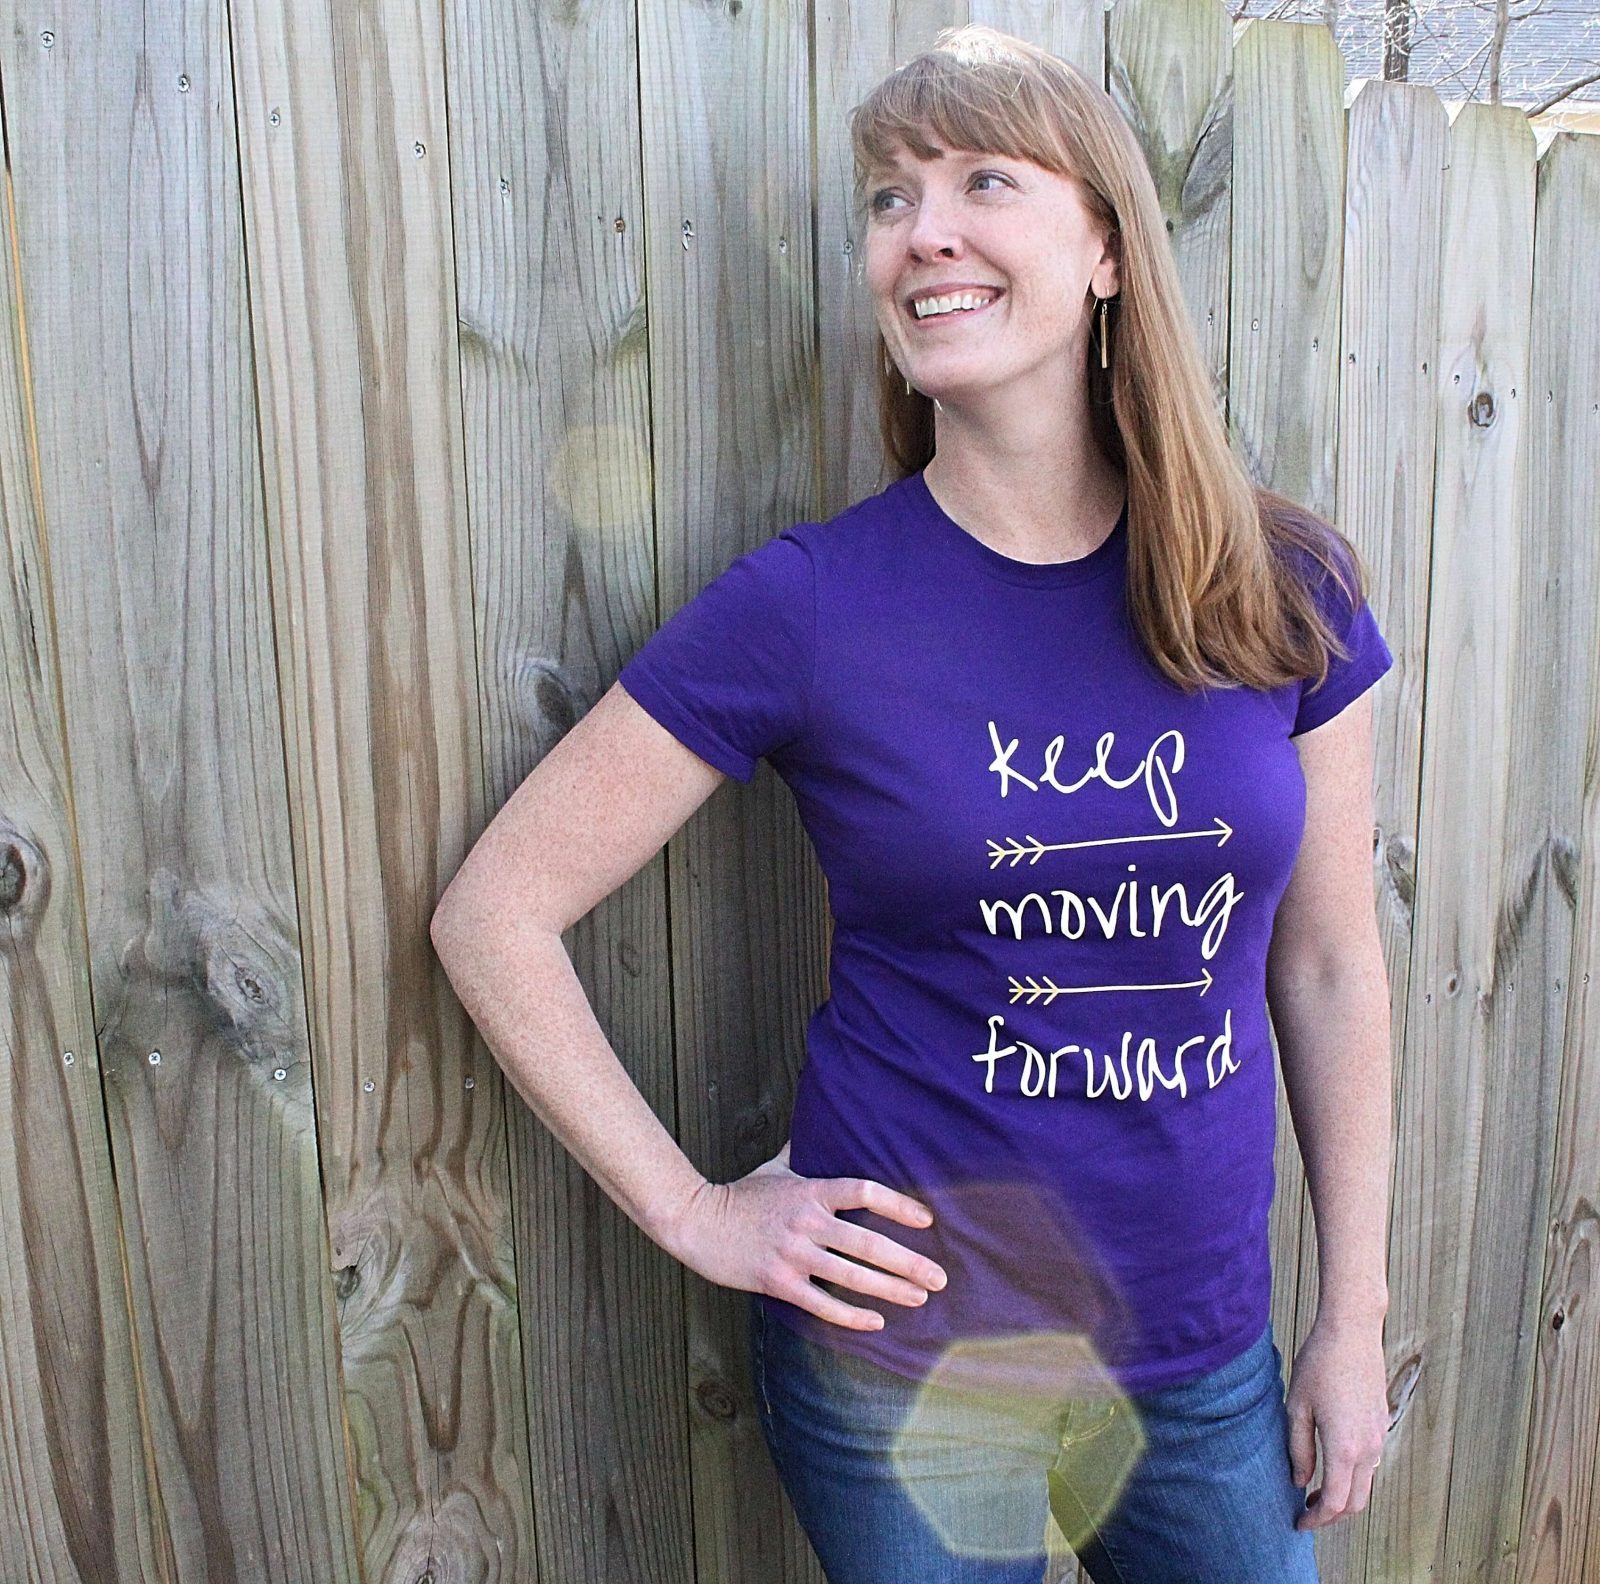 Model posing in front of a wood fence in the blue keep moving forward tshirt